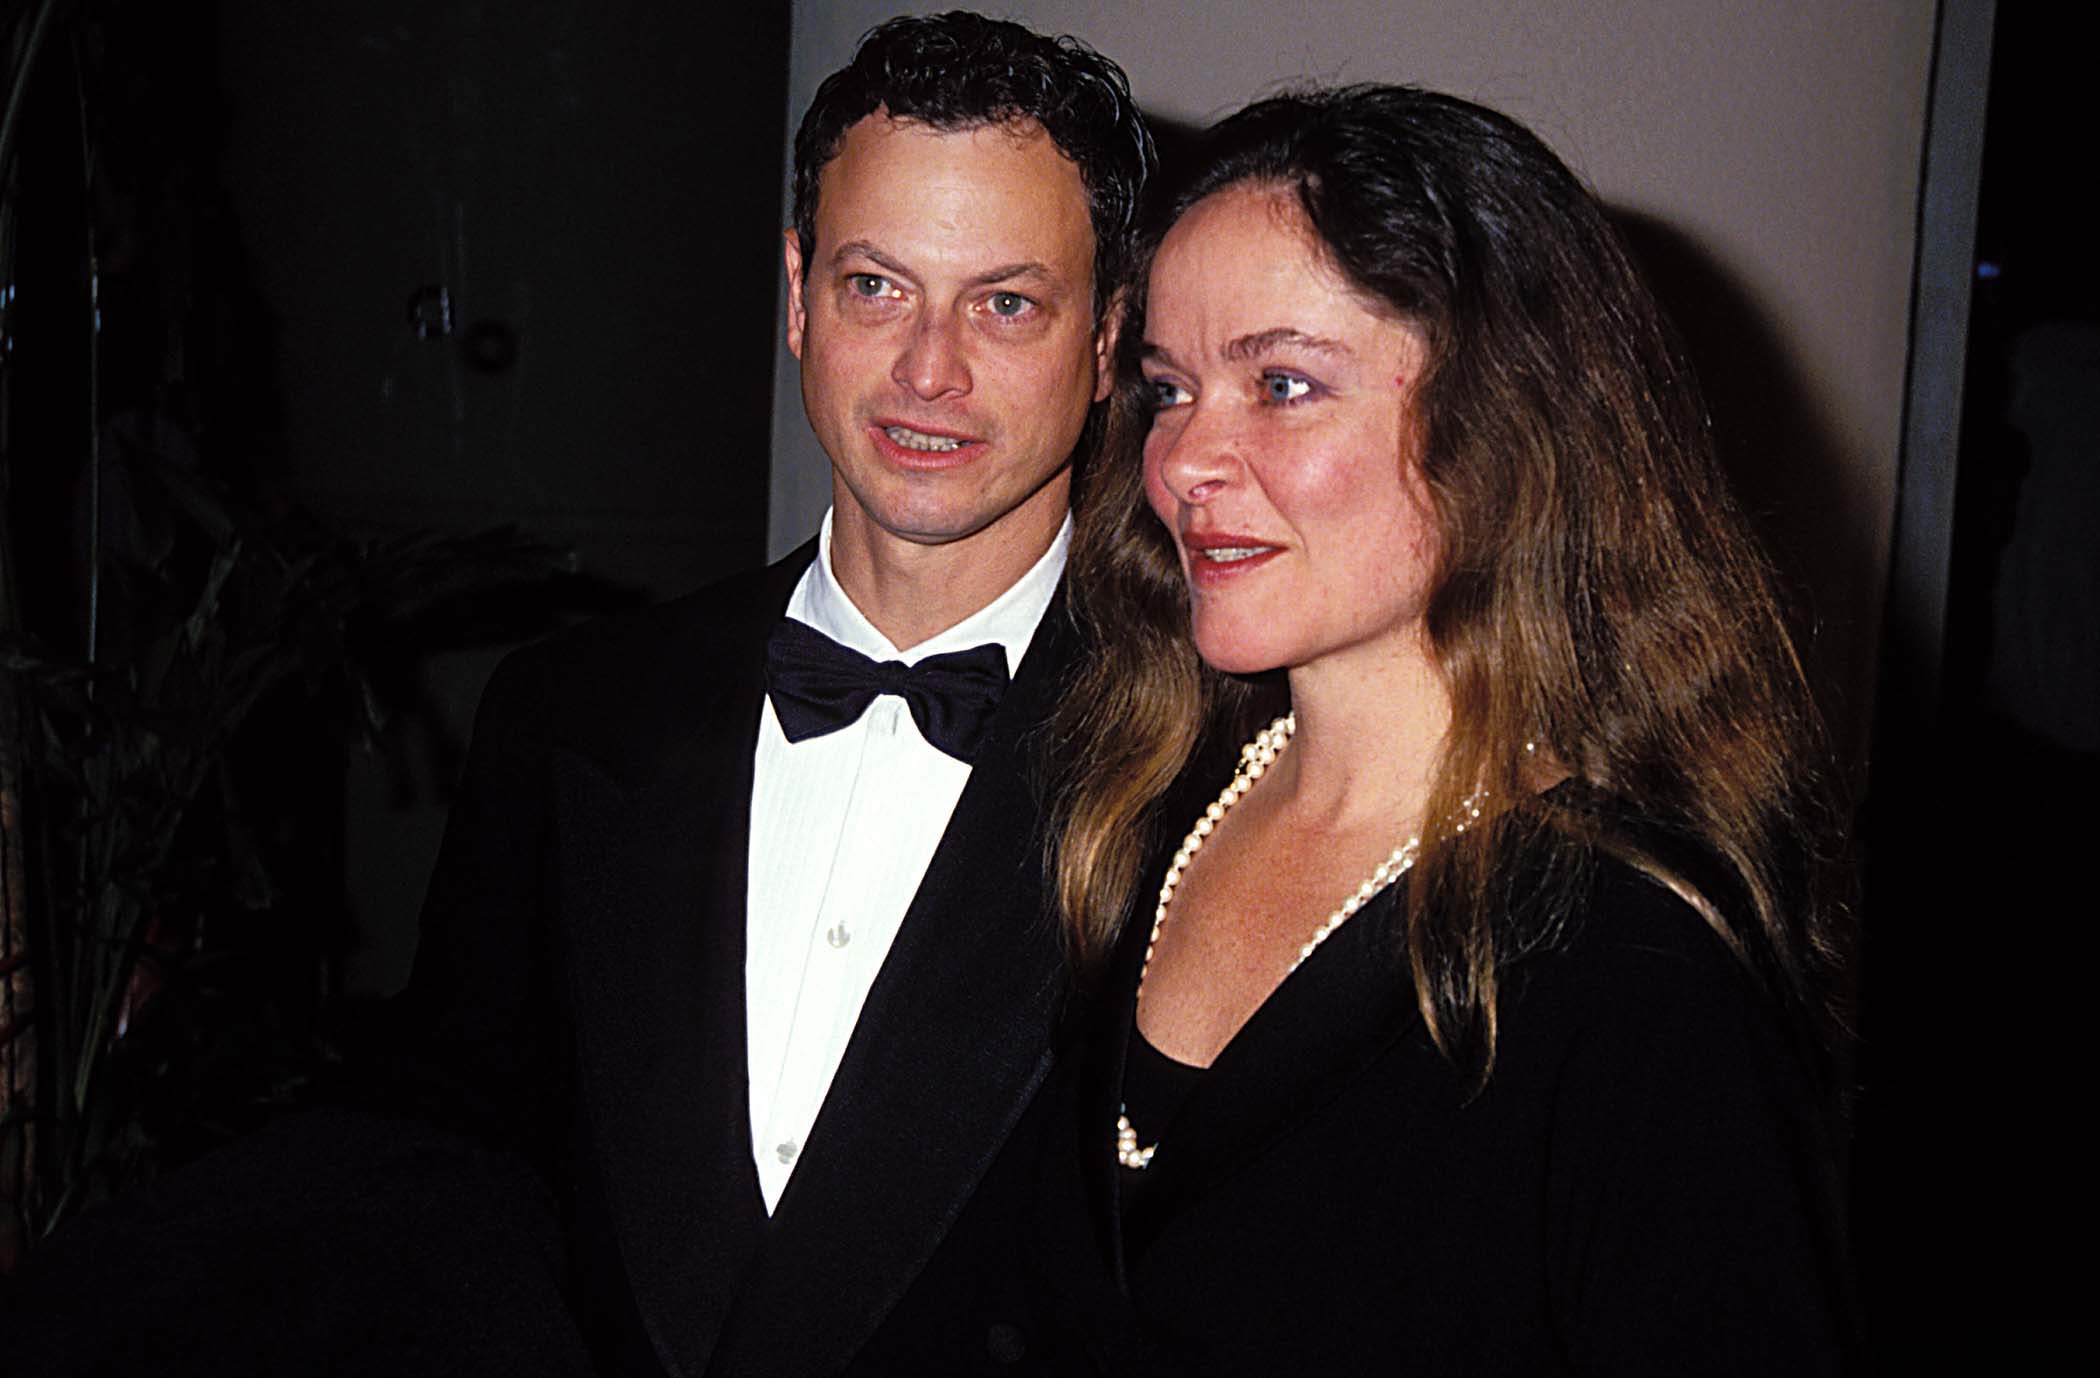 Gary Sinise and wife Moira Harris during AFI Tribute to Steven Spielberg at Beverly Hilton Hotel in Beverly Hills, CA, United States | Source: Getty Images